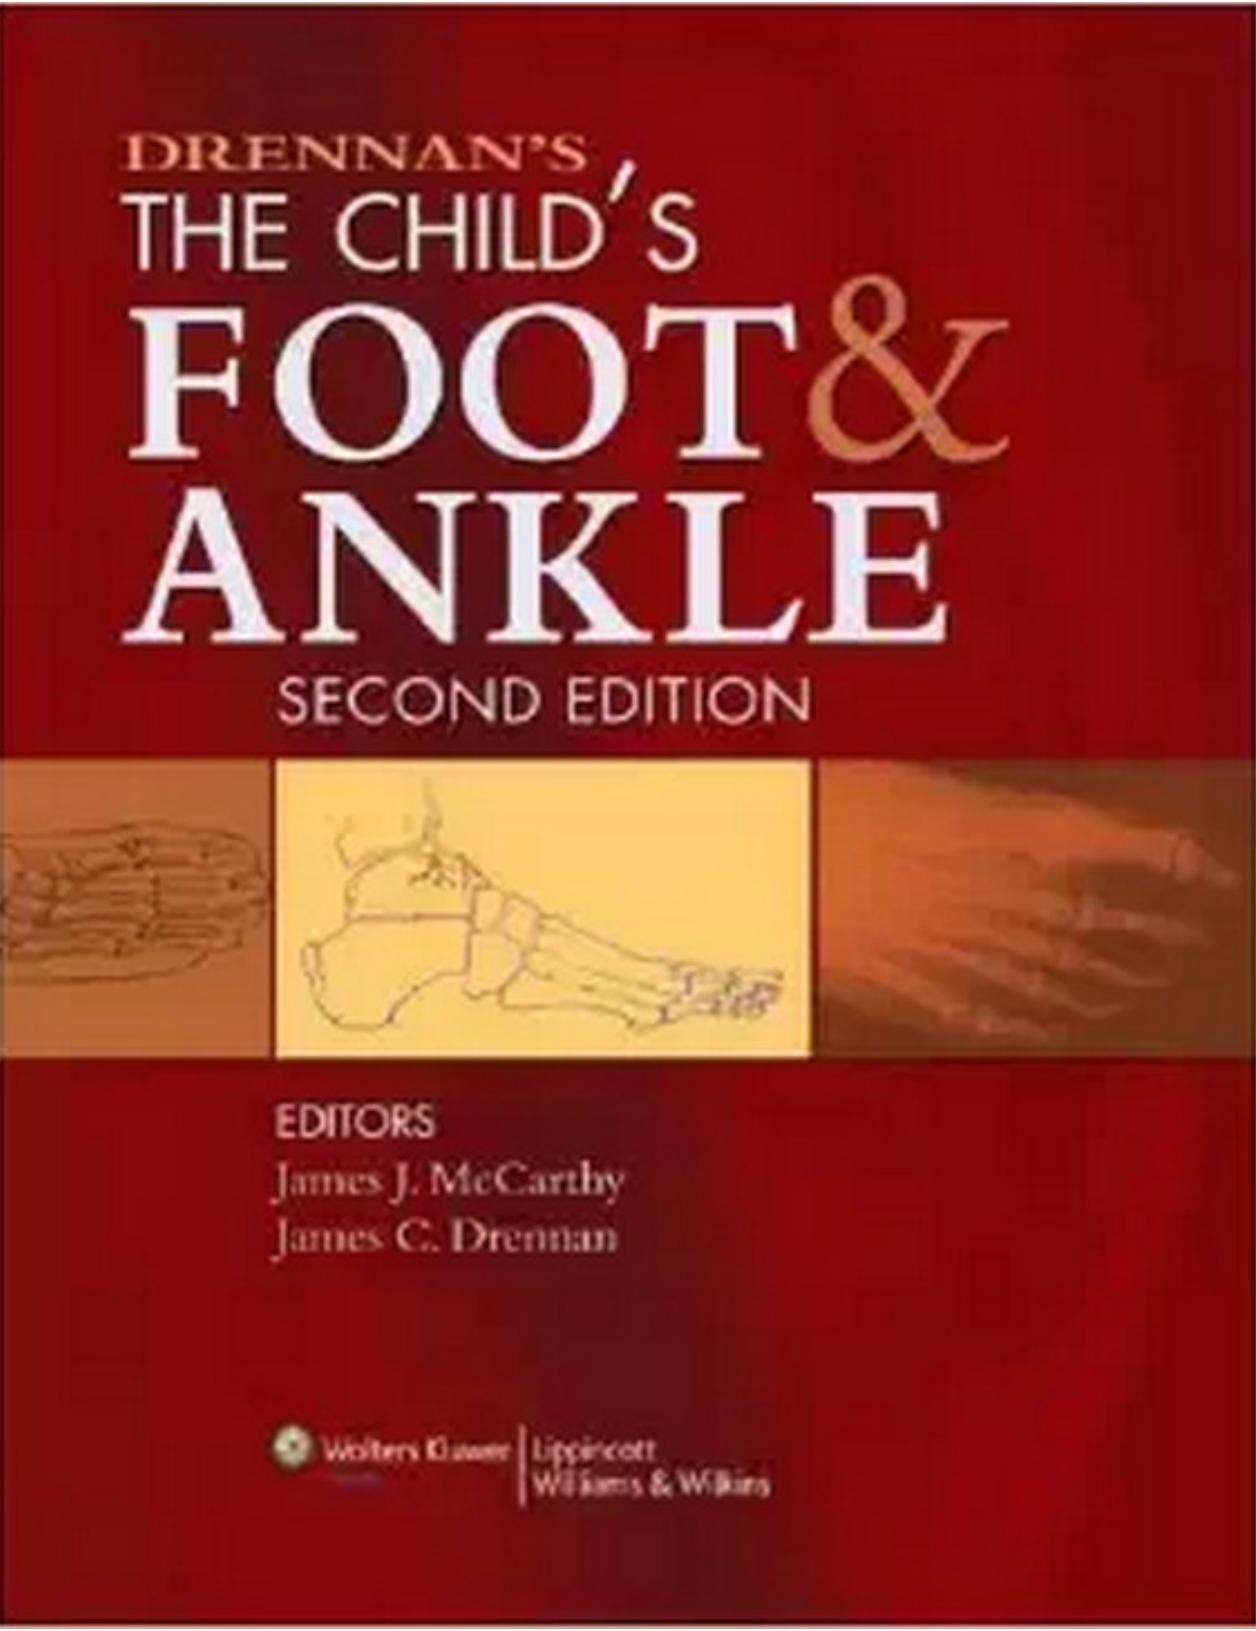 Drennan's The Child's Foot and Ankle 2nd Edition - McCarthy, James J.(Author).jpg